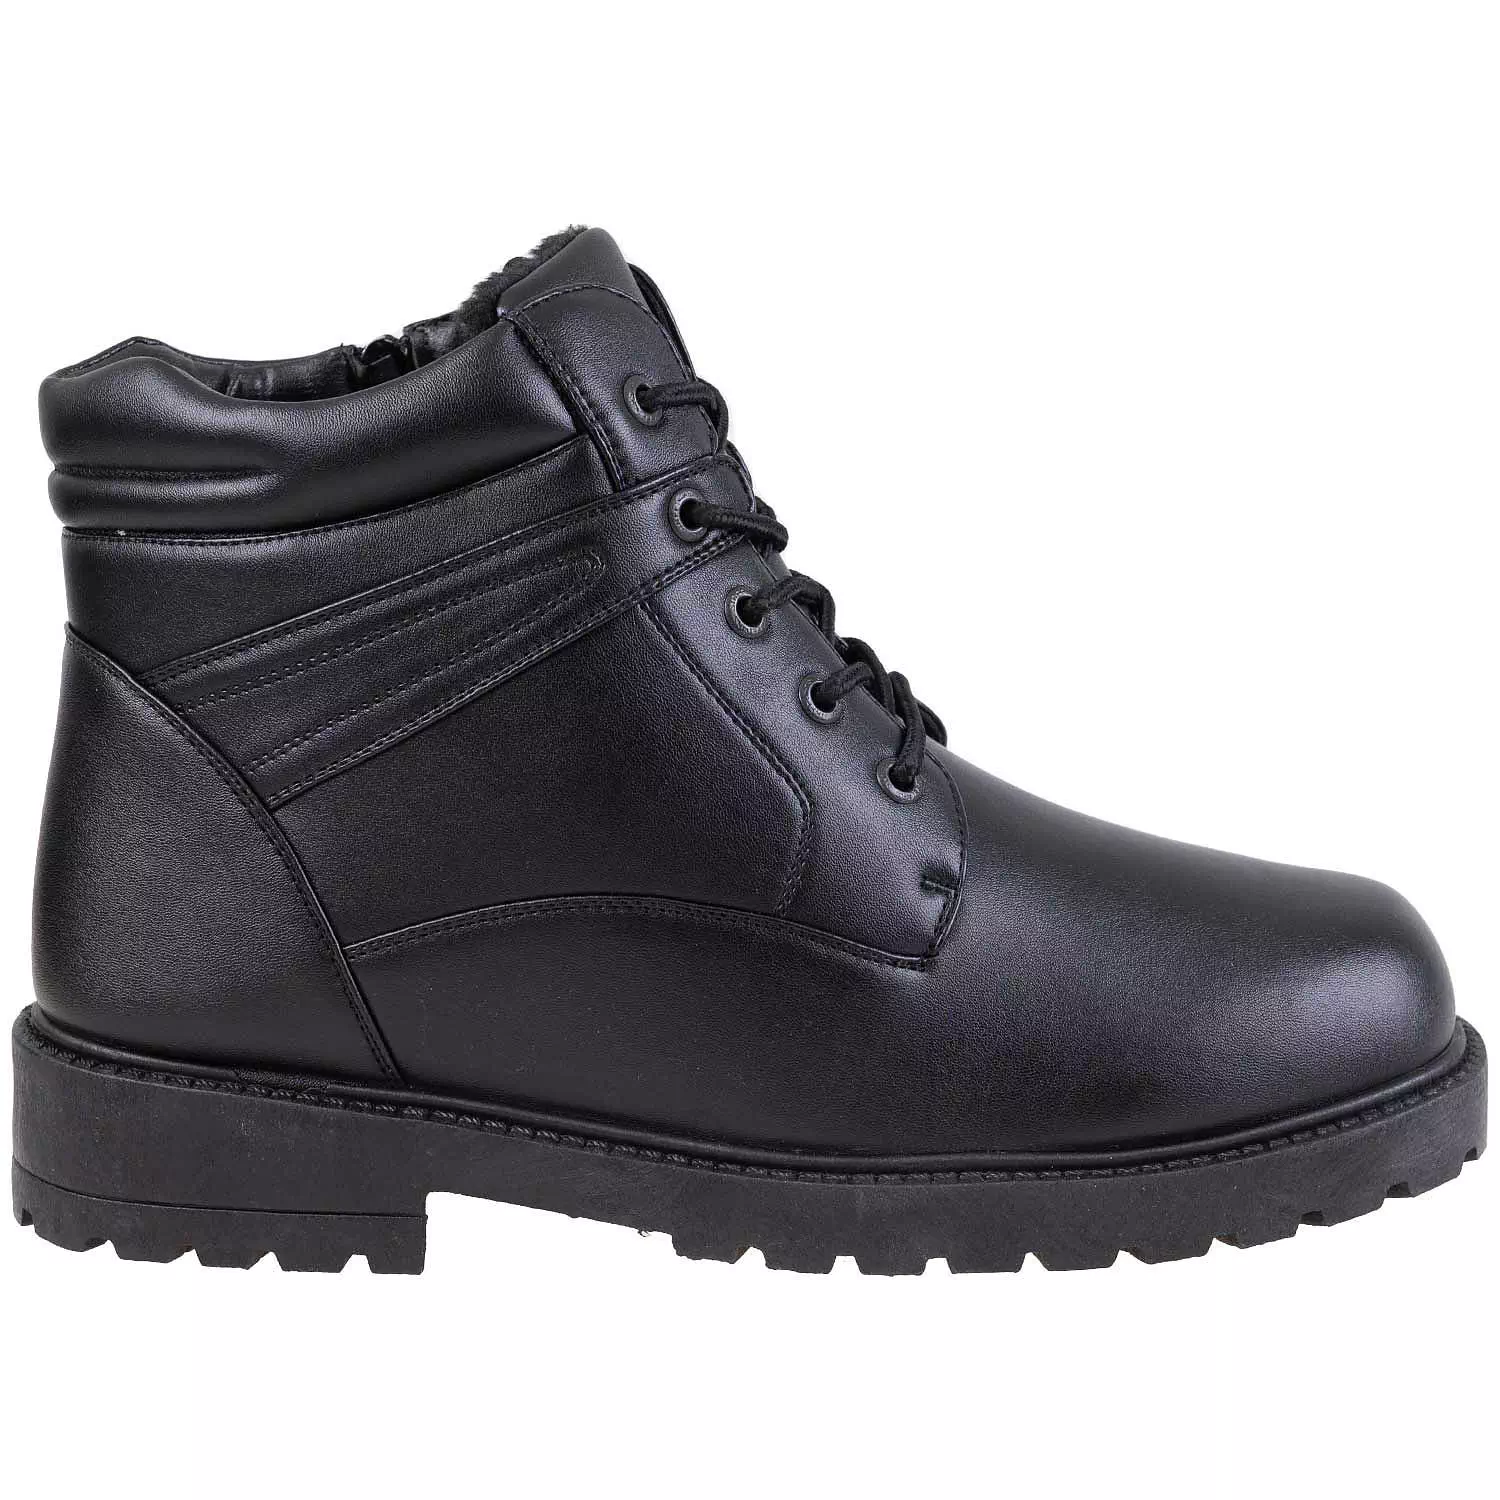 Men's high ankle lace-up boots, black, size 10